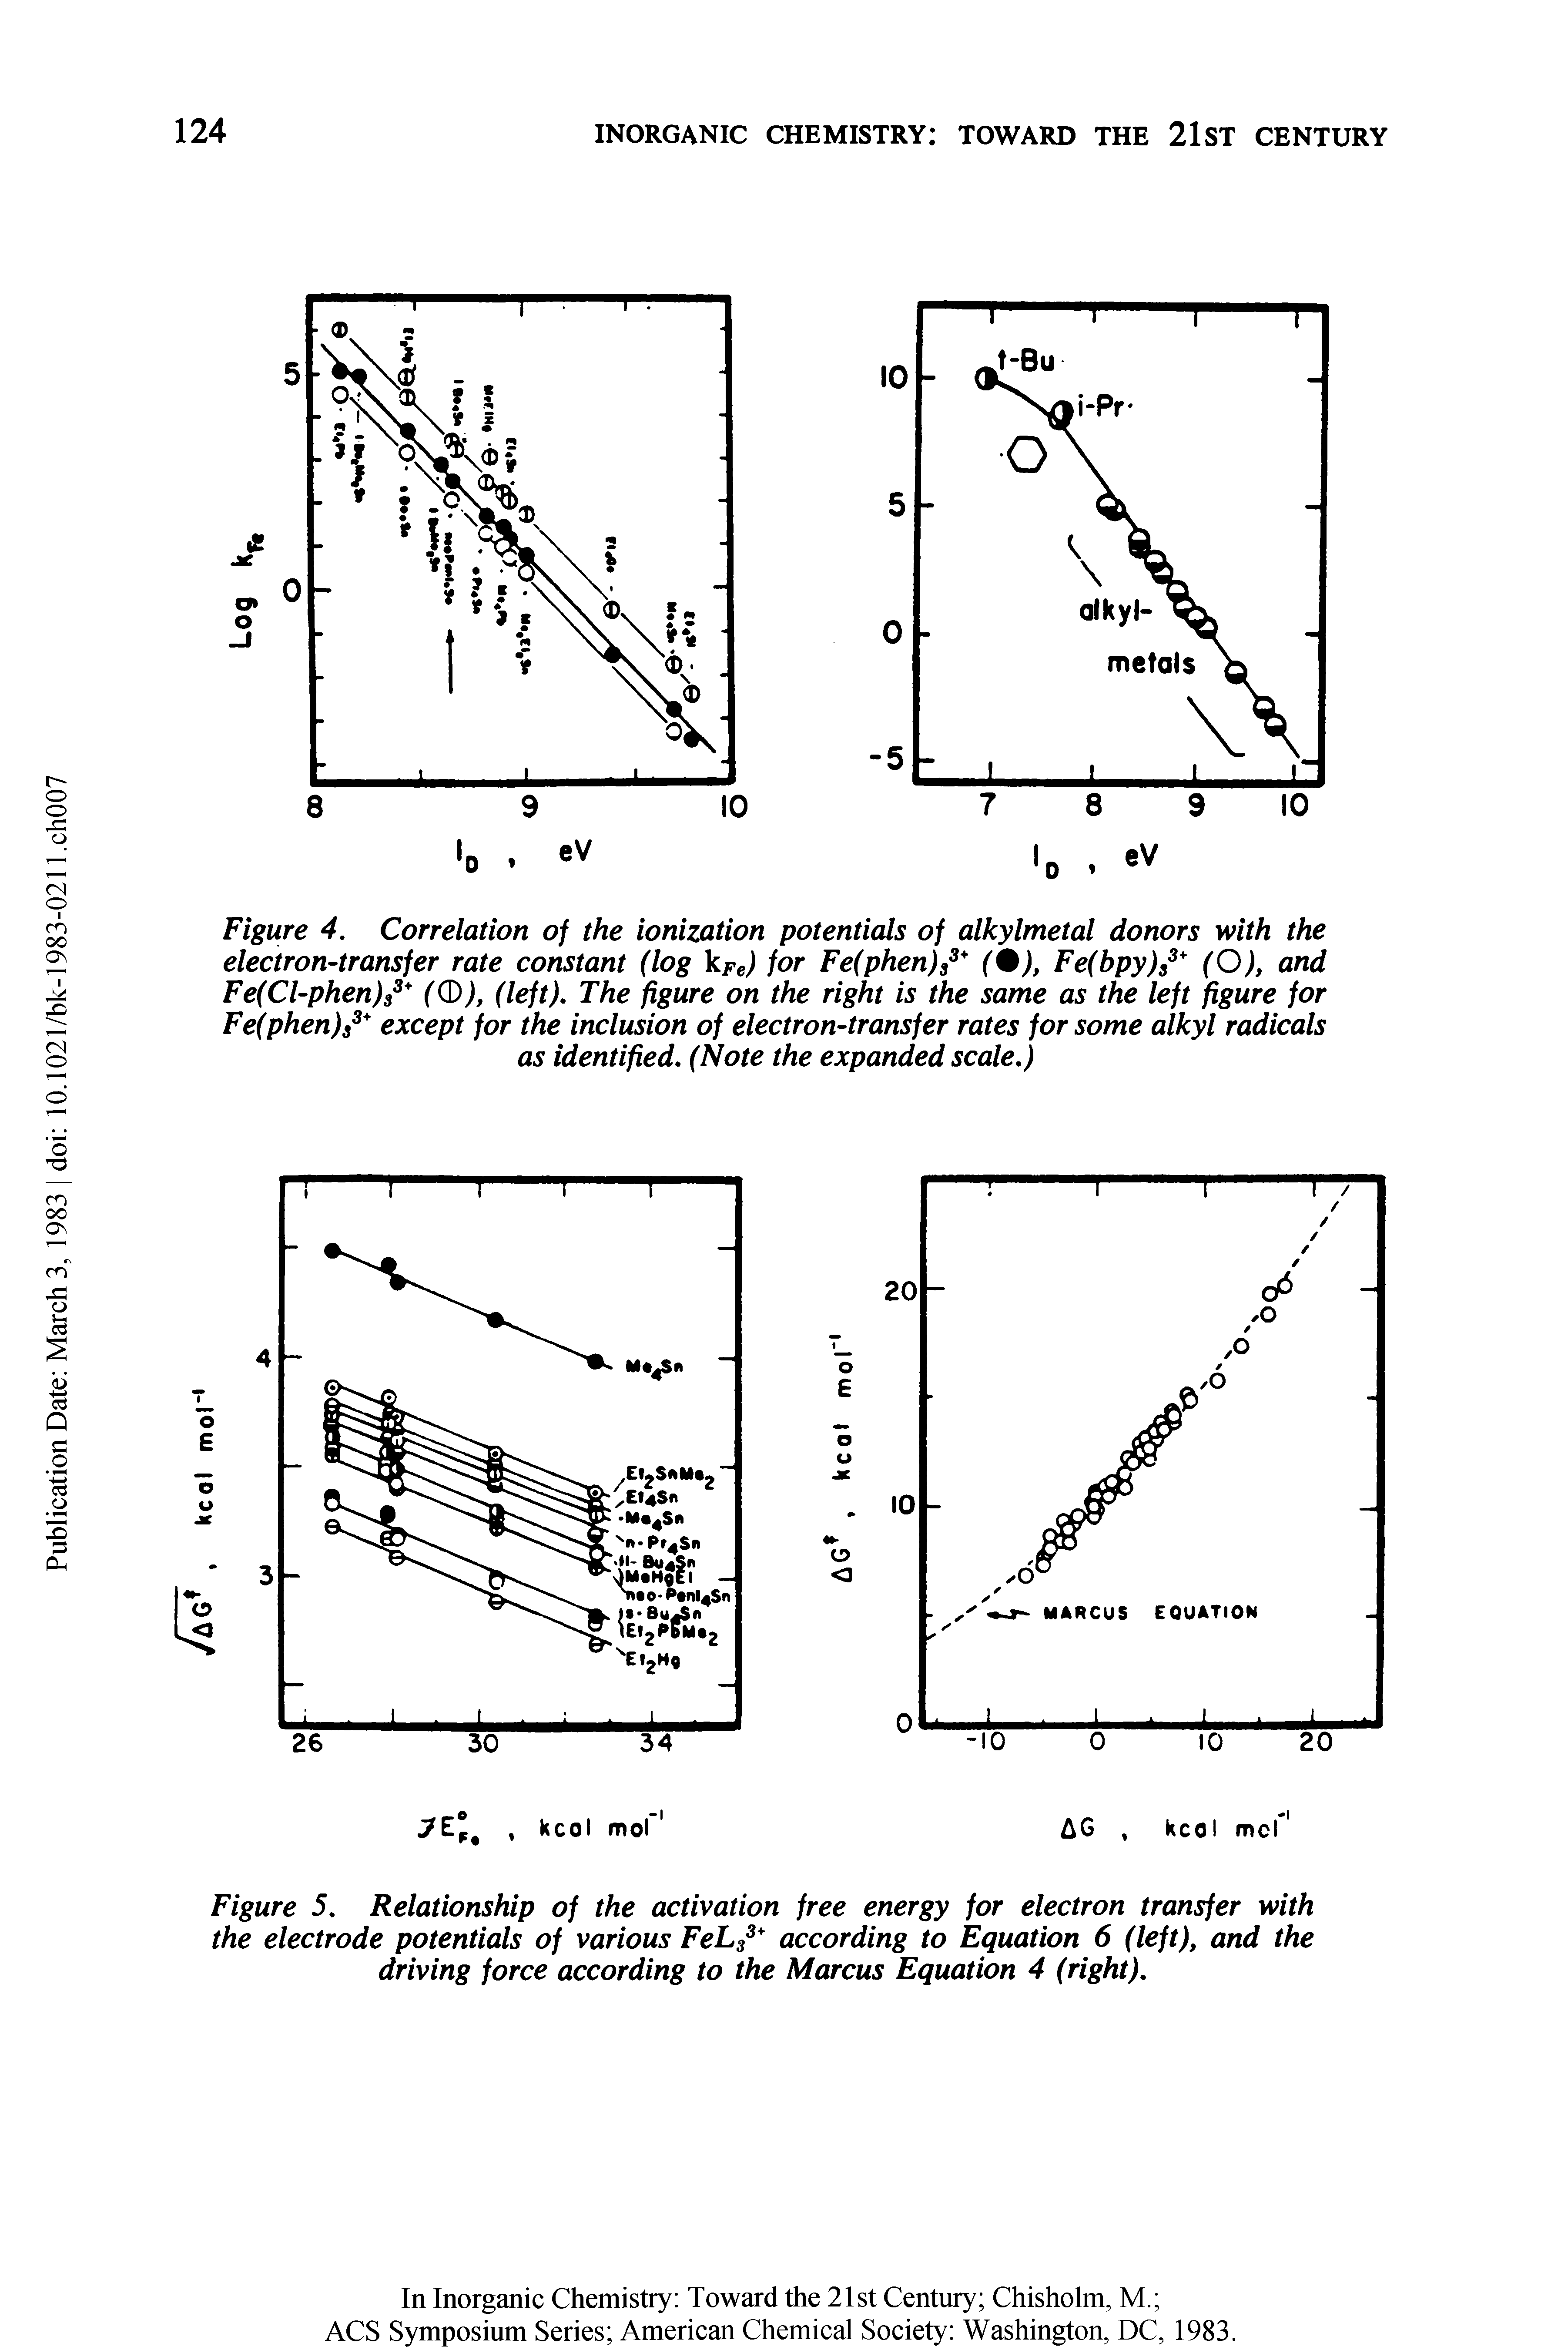 Figure 4. Correlation of the ionization potentials of alkylmetal donors with the electron-transfer rate constant (log kFe) for Fe(phen)s3+ (%), Fe(bpy)s3+ (O), and Fe(Cl-phen)s3+ ((D), (left). The figure on the right is the same as the left figure for Fe(phen)s3+ except for the inclusion of electron-transfer rates for some alkyl radicals as identified, (Note the expanded scale,)...